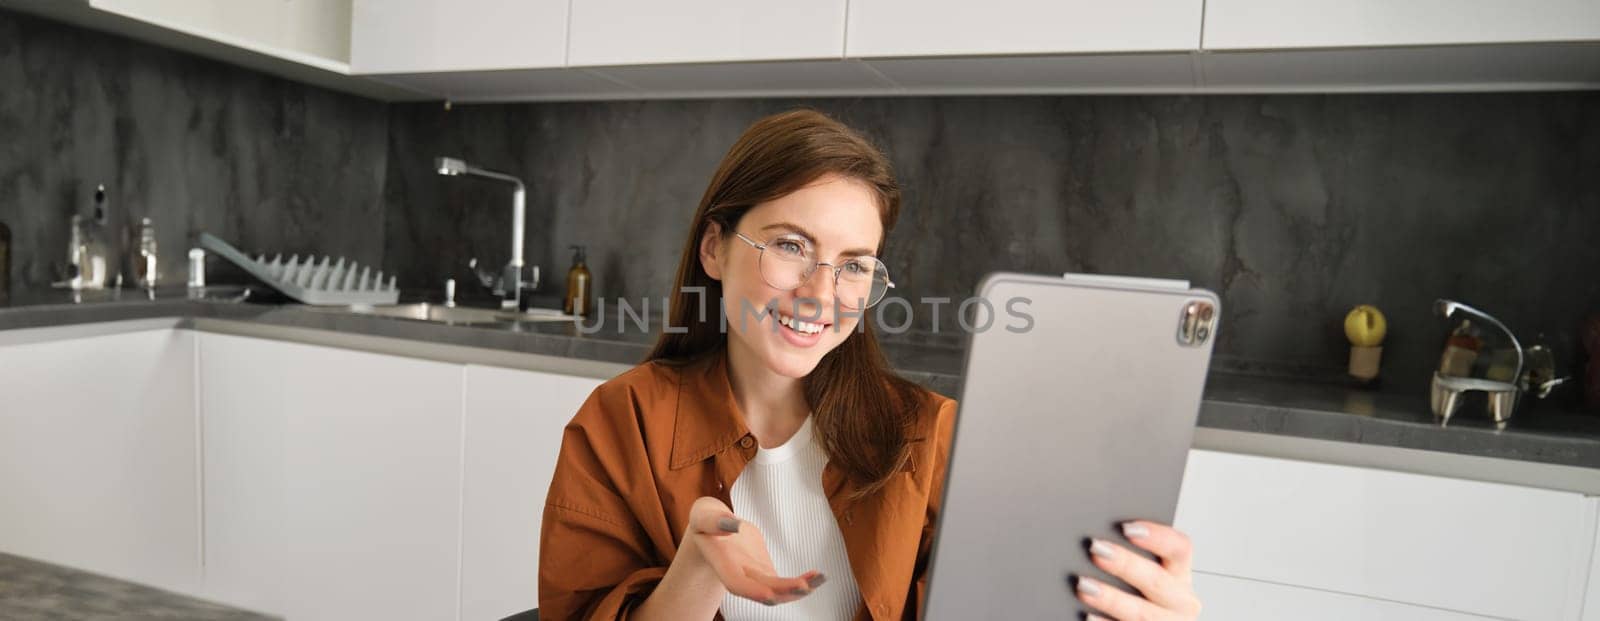 Portrait of young woman joins online course on digital tablet, having conversation, chatting on remote, sitting in kitchen.